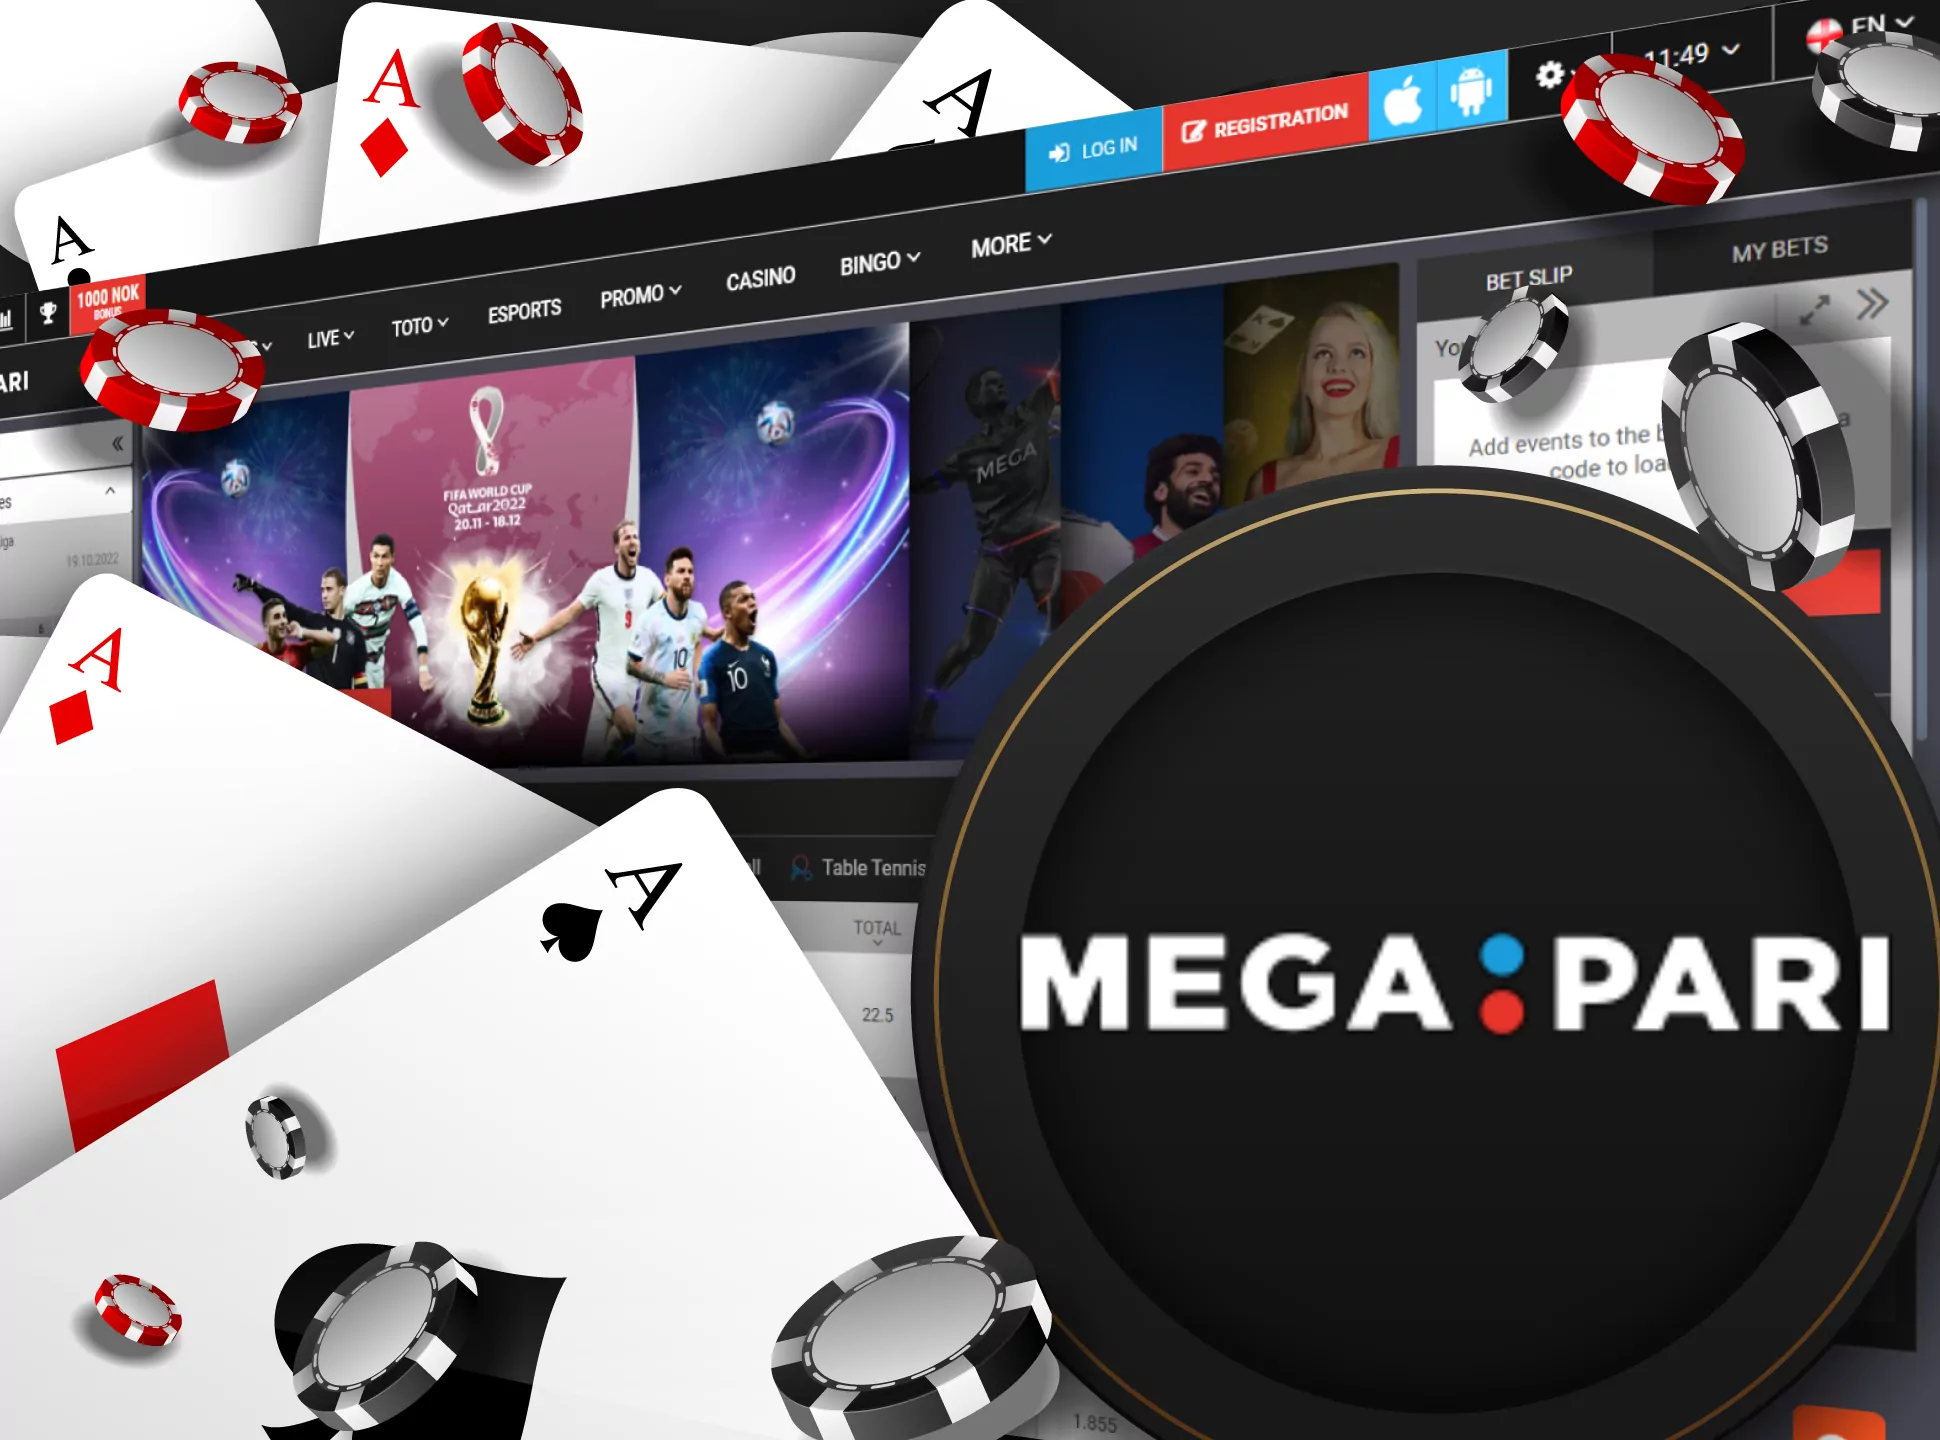 You can easlily play casino games in the MegaPari casino.